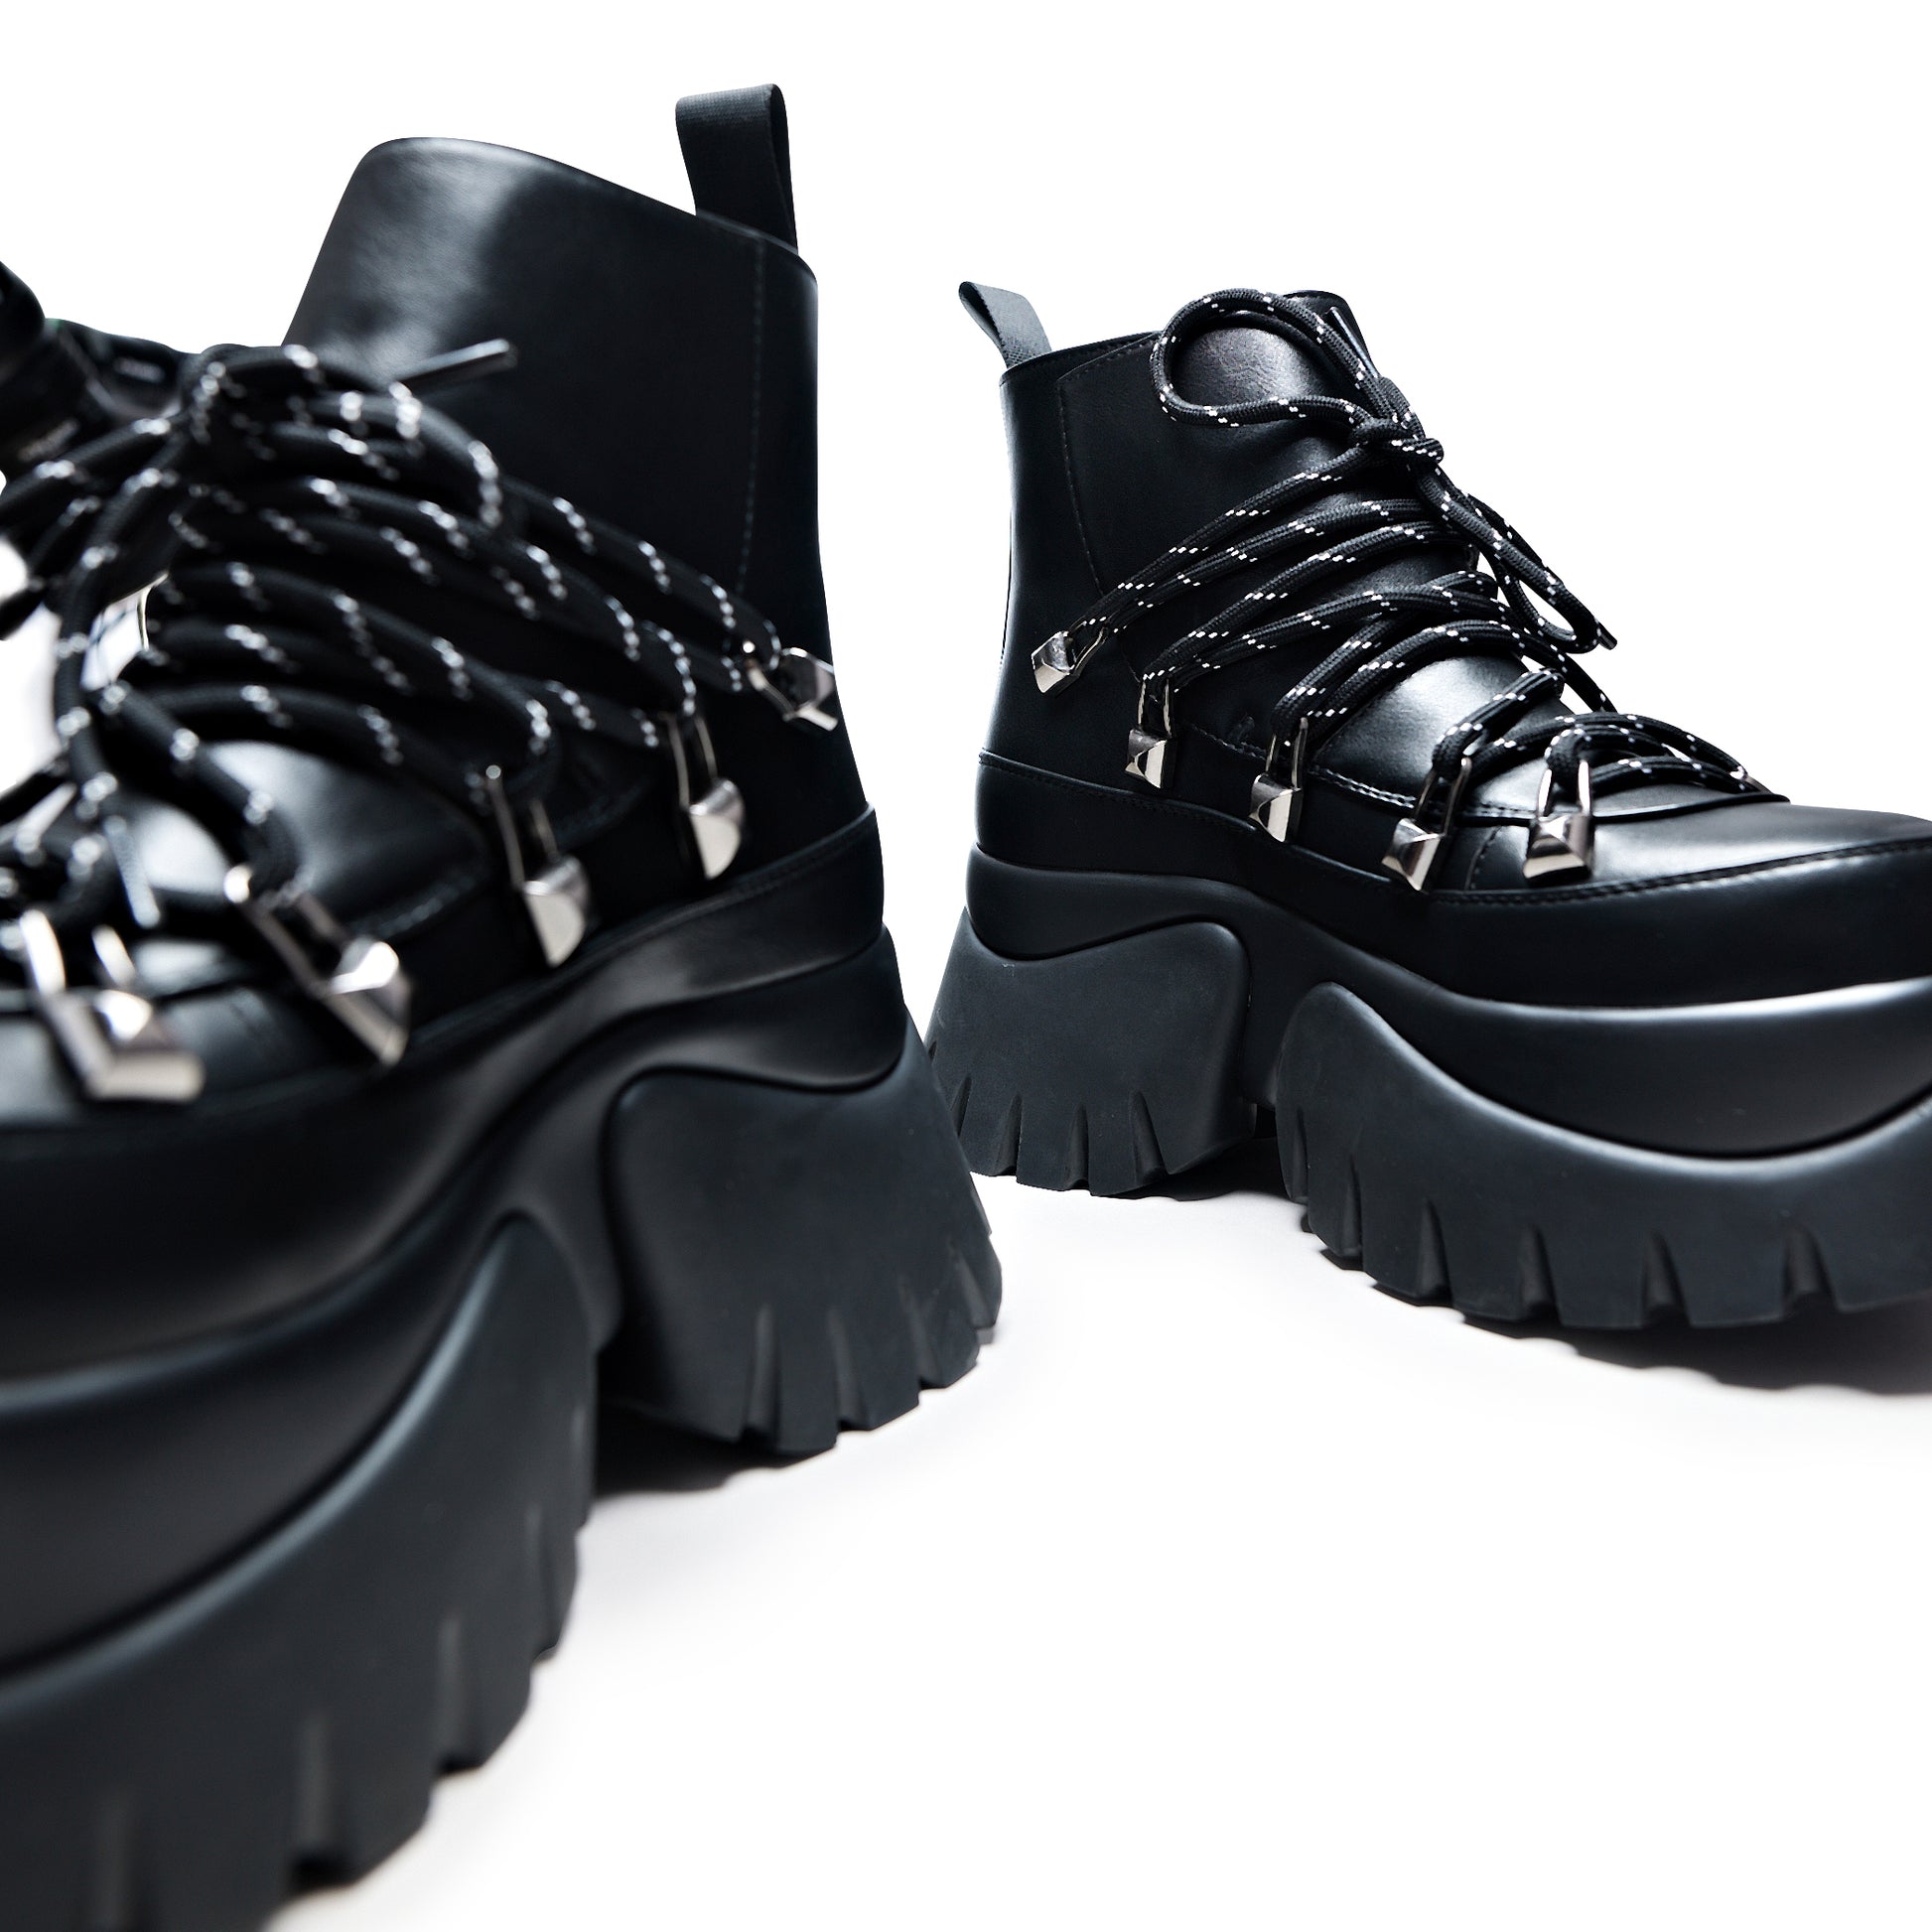 Sigmar Chunky Hiking Boots - Ankle Boots - KOI Footwear - Black - Front View